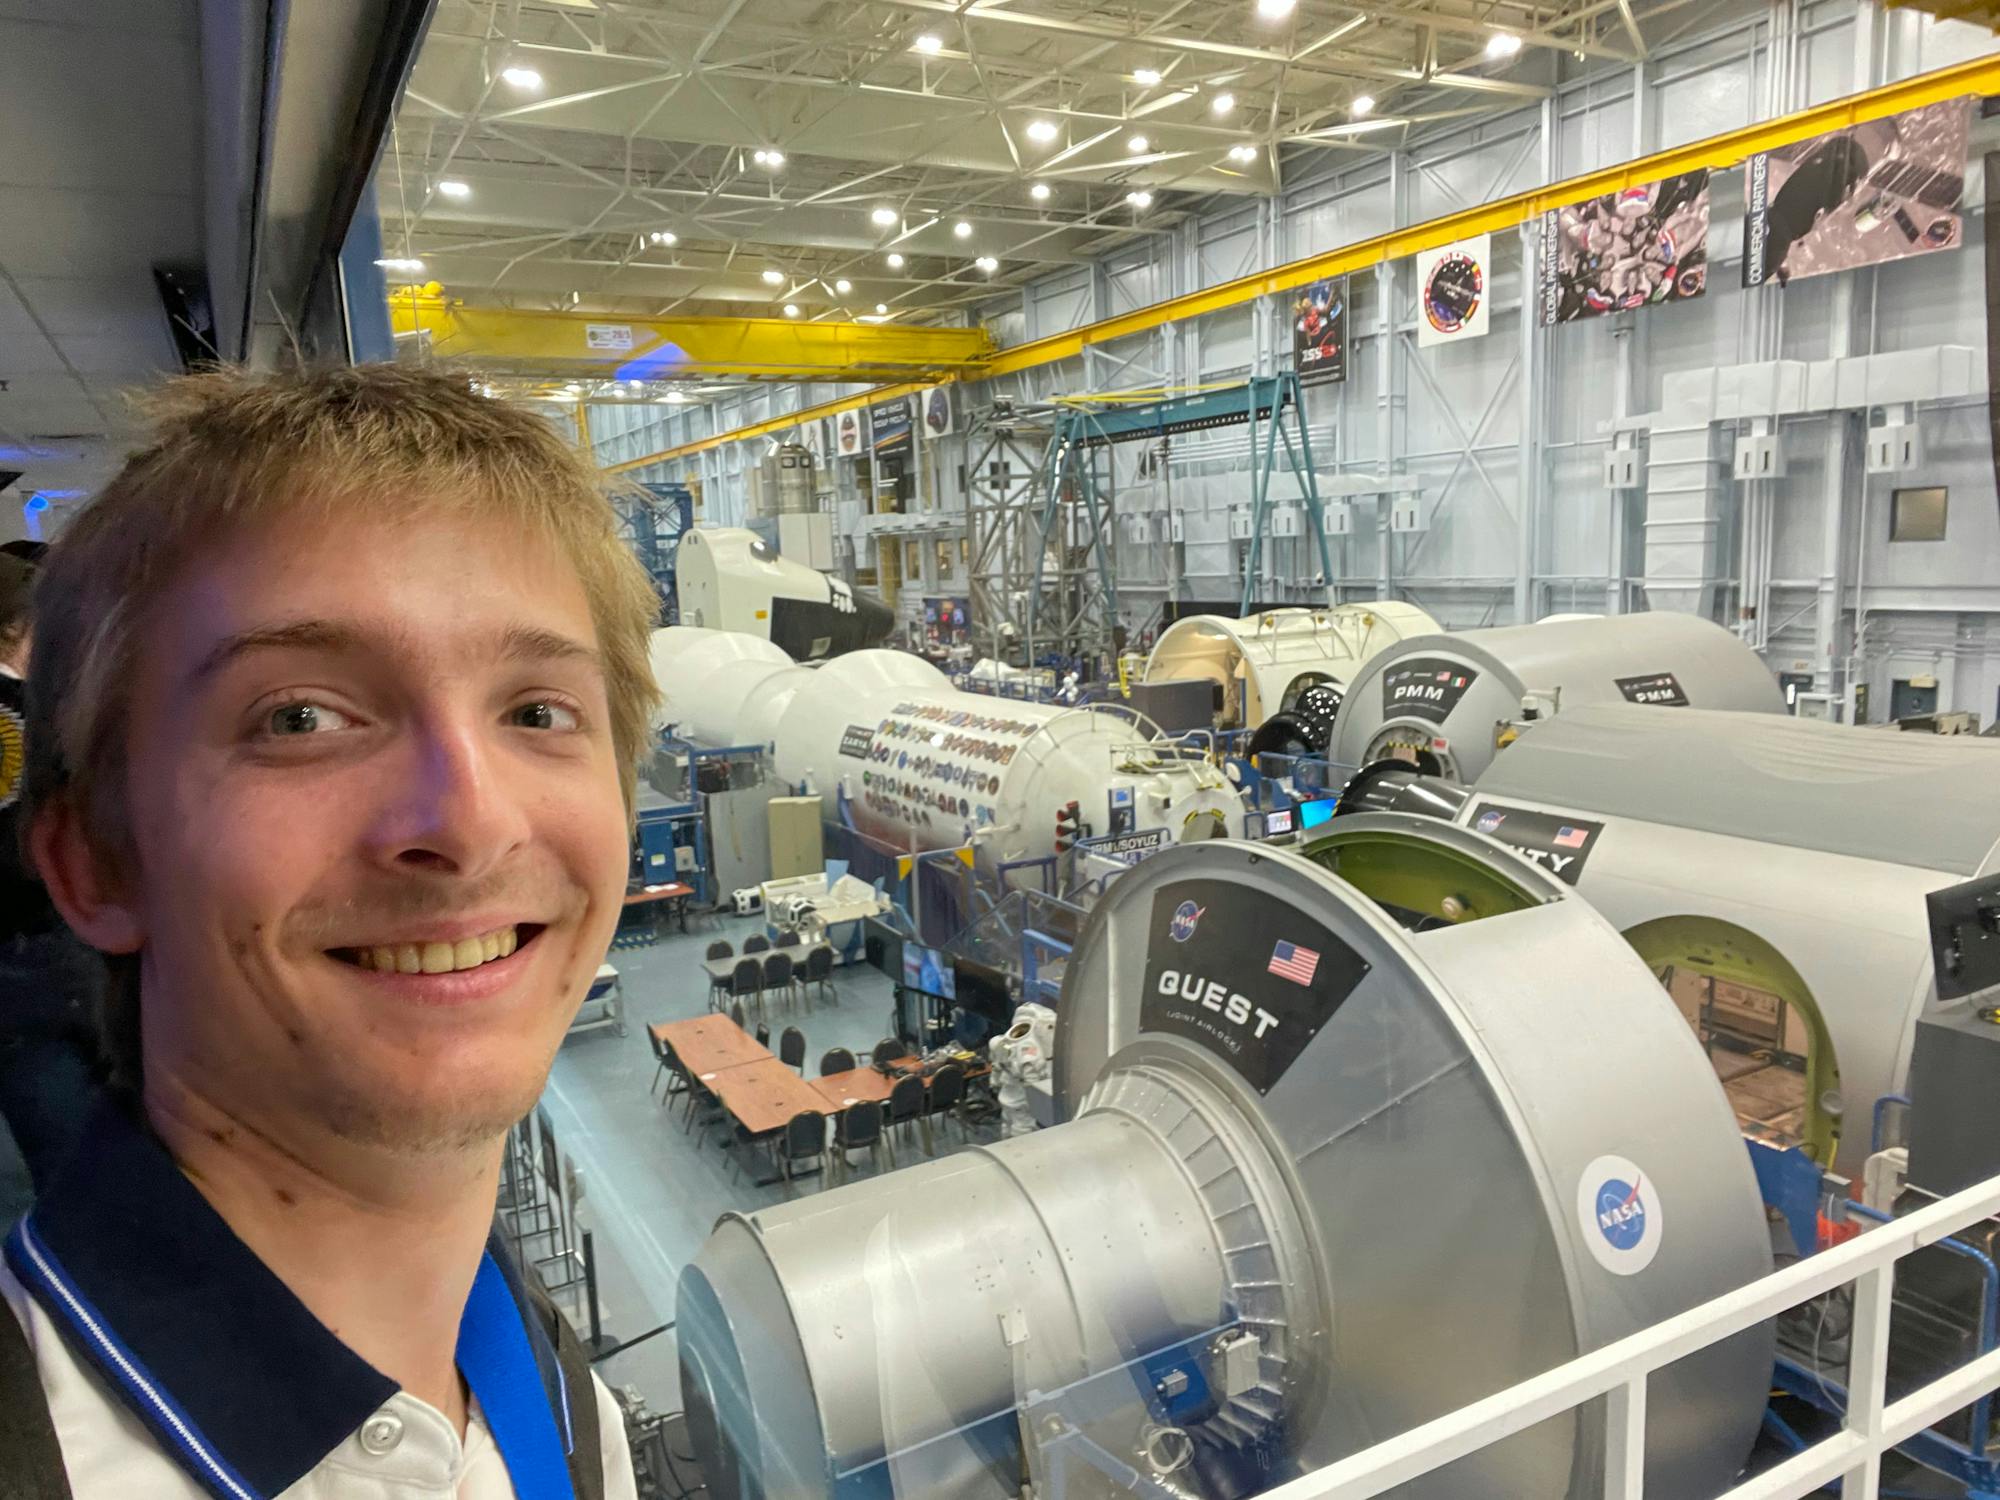 Selfie of a young man posing in front of decommissioned space modules